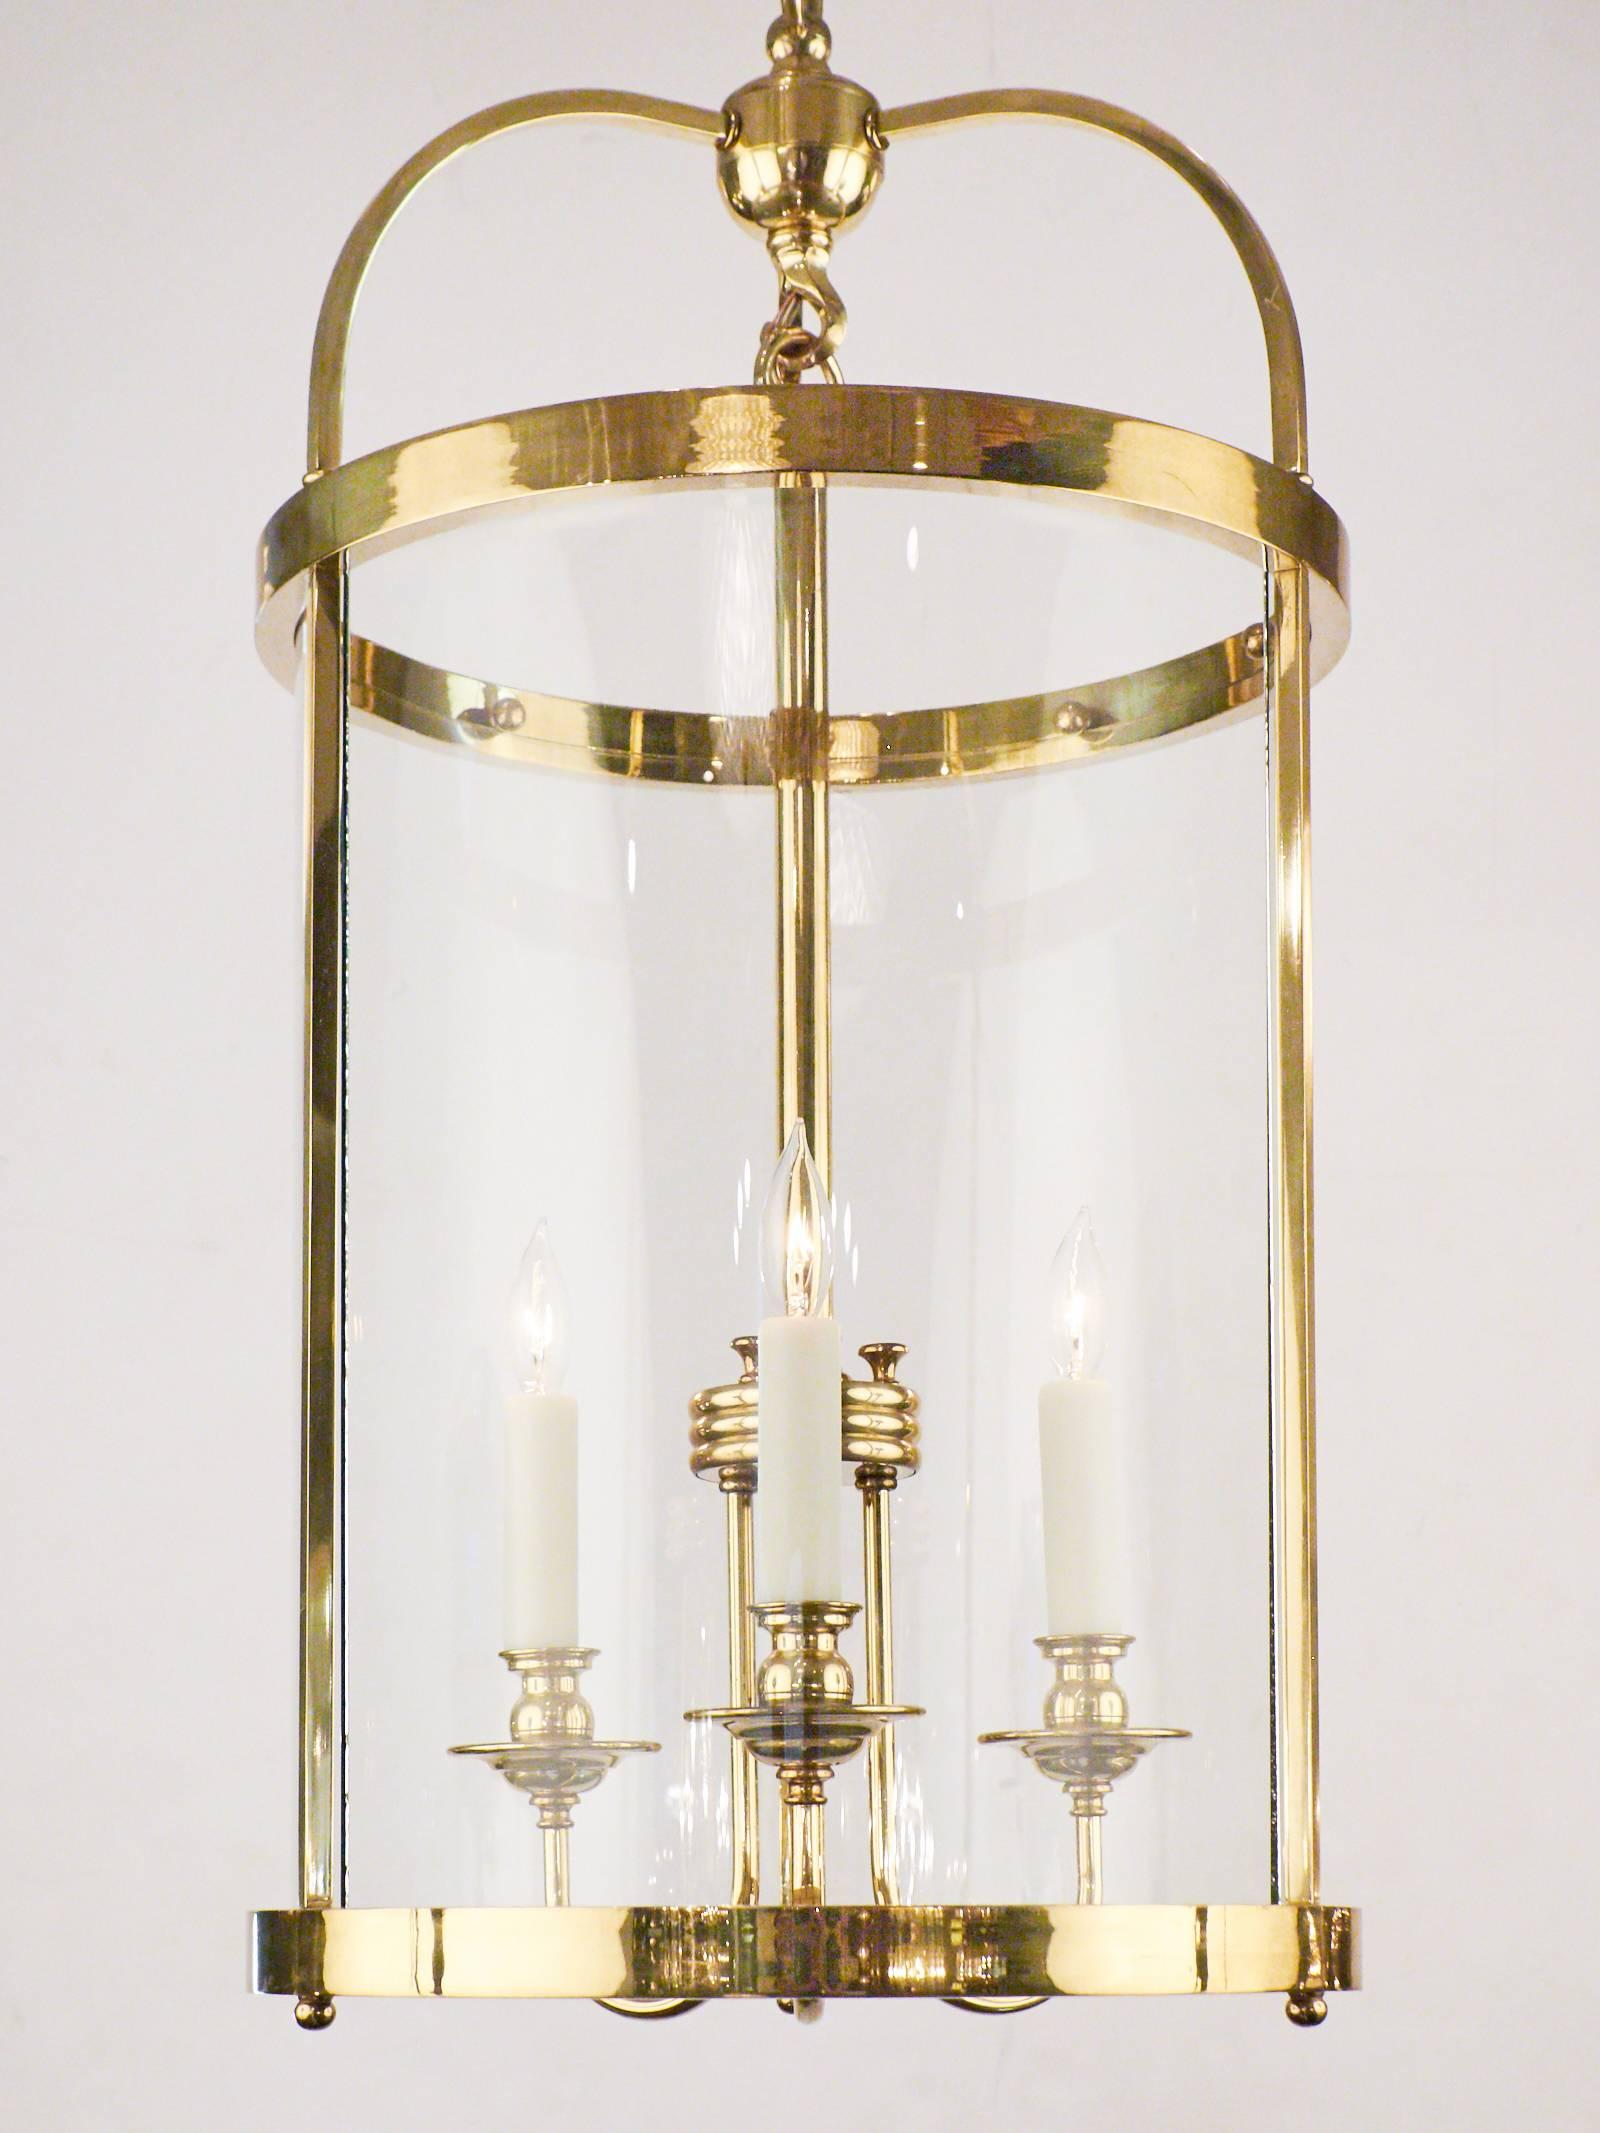 French vintage lantern pendant light in brass and glass with three candelabra lights, rewired for the US. Height with included chain and canopy is 58 1/4